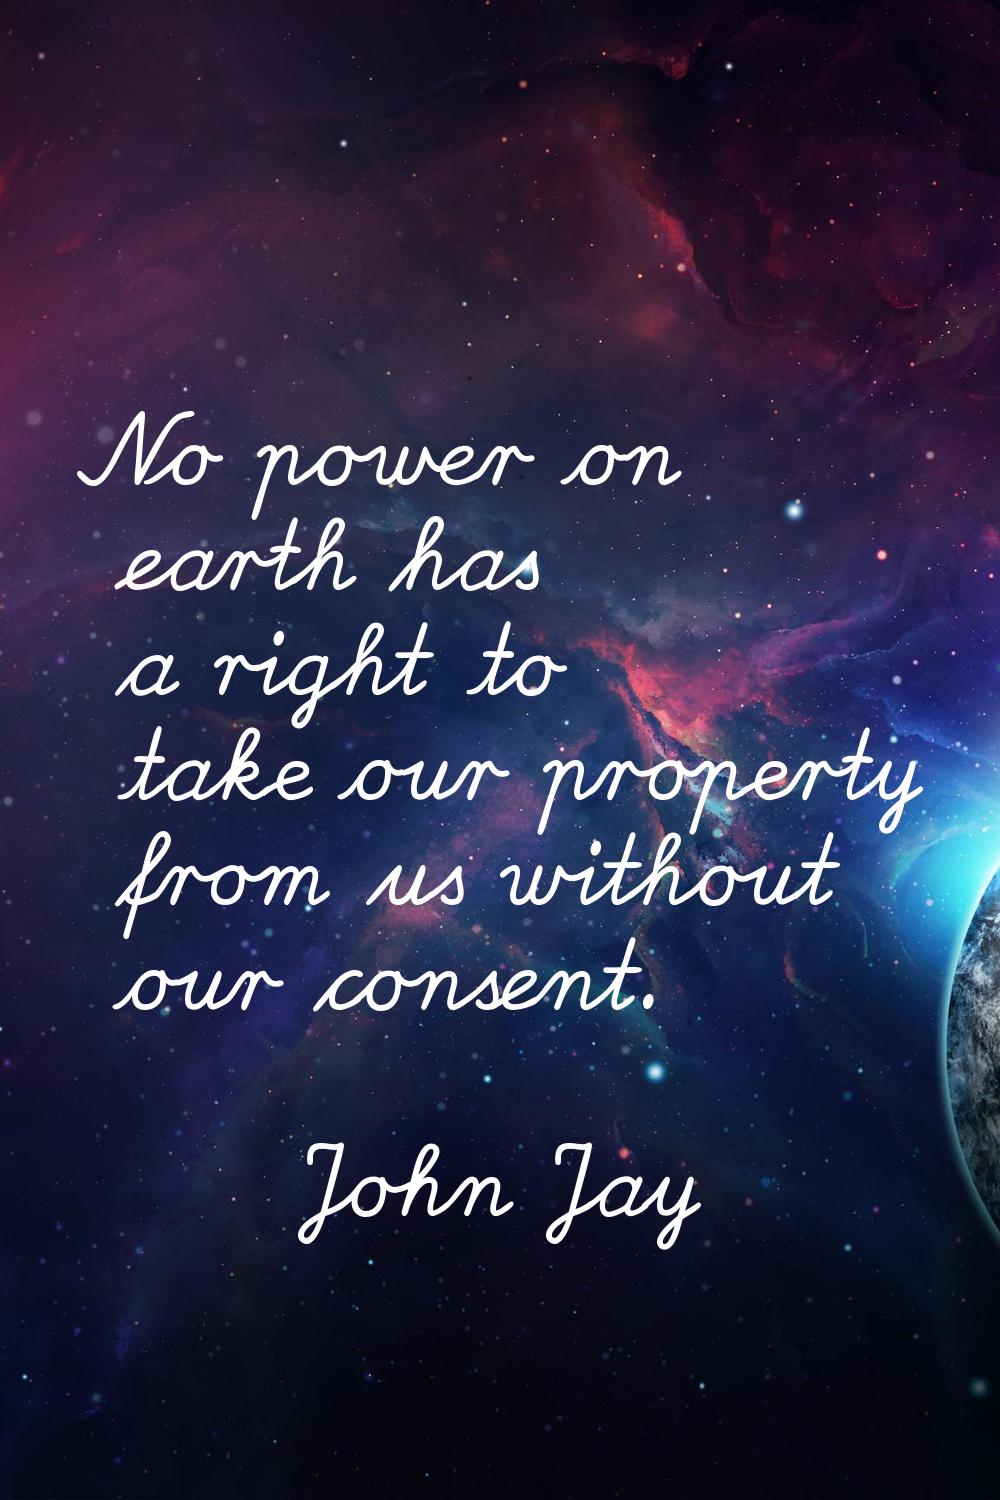 No power on earth has a right to take our property from us without our consent.